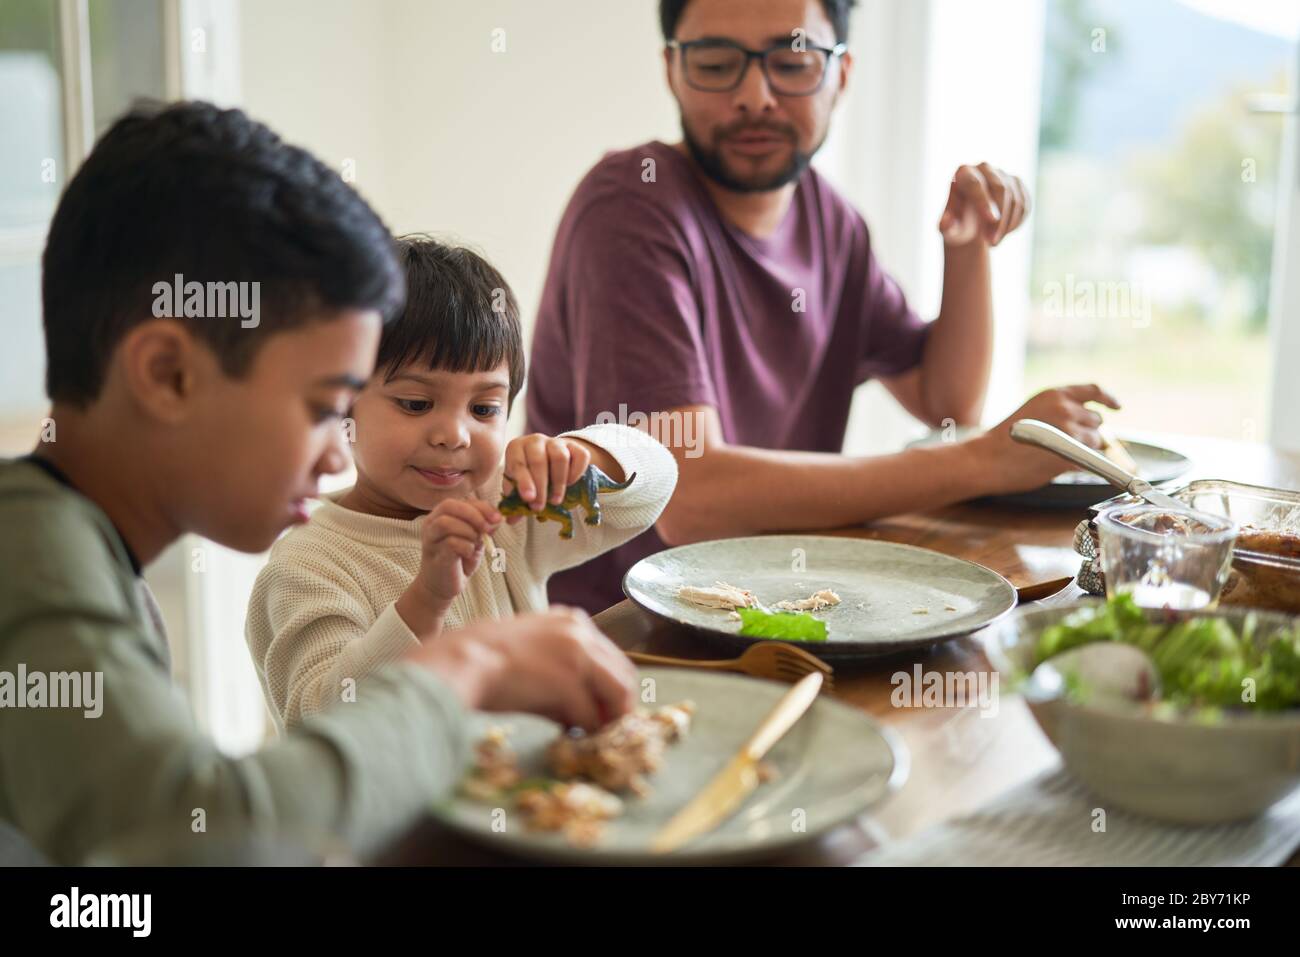 Family eating lunch at table Stock Photo